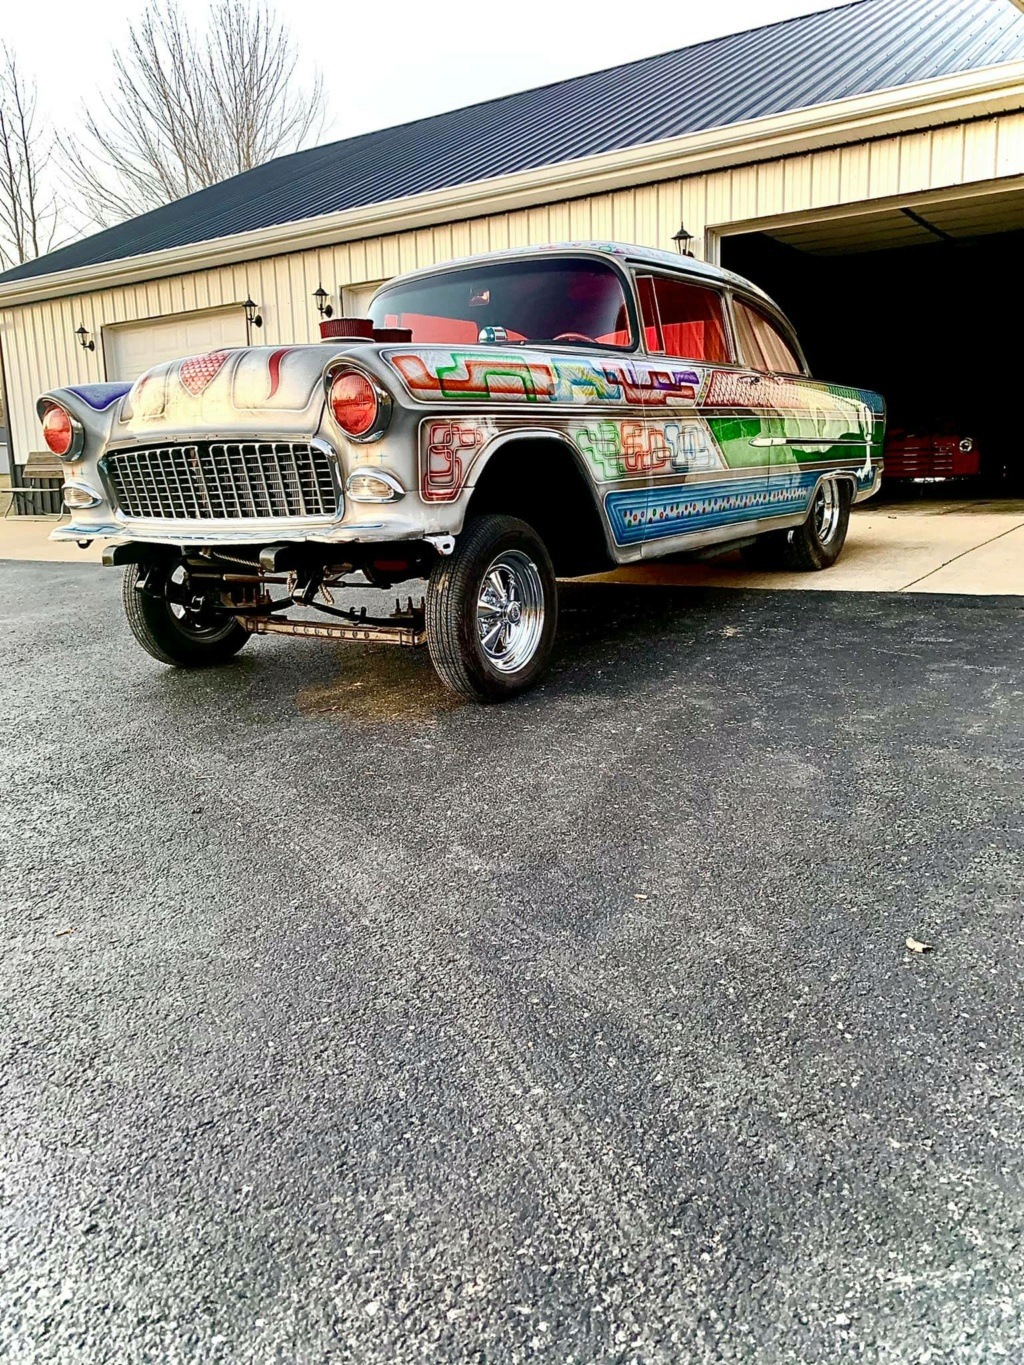 Ronnie N Kristina Jones - 1955 Chevrolet Gasser sixties look with flake, panneling, lace painting 15723410